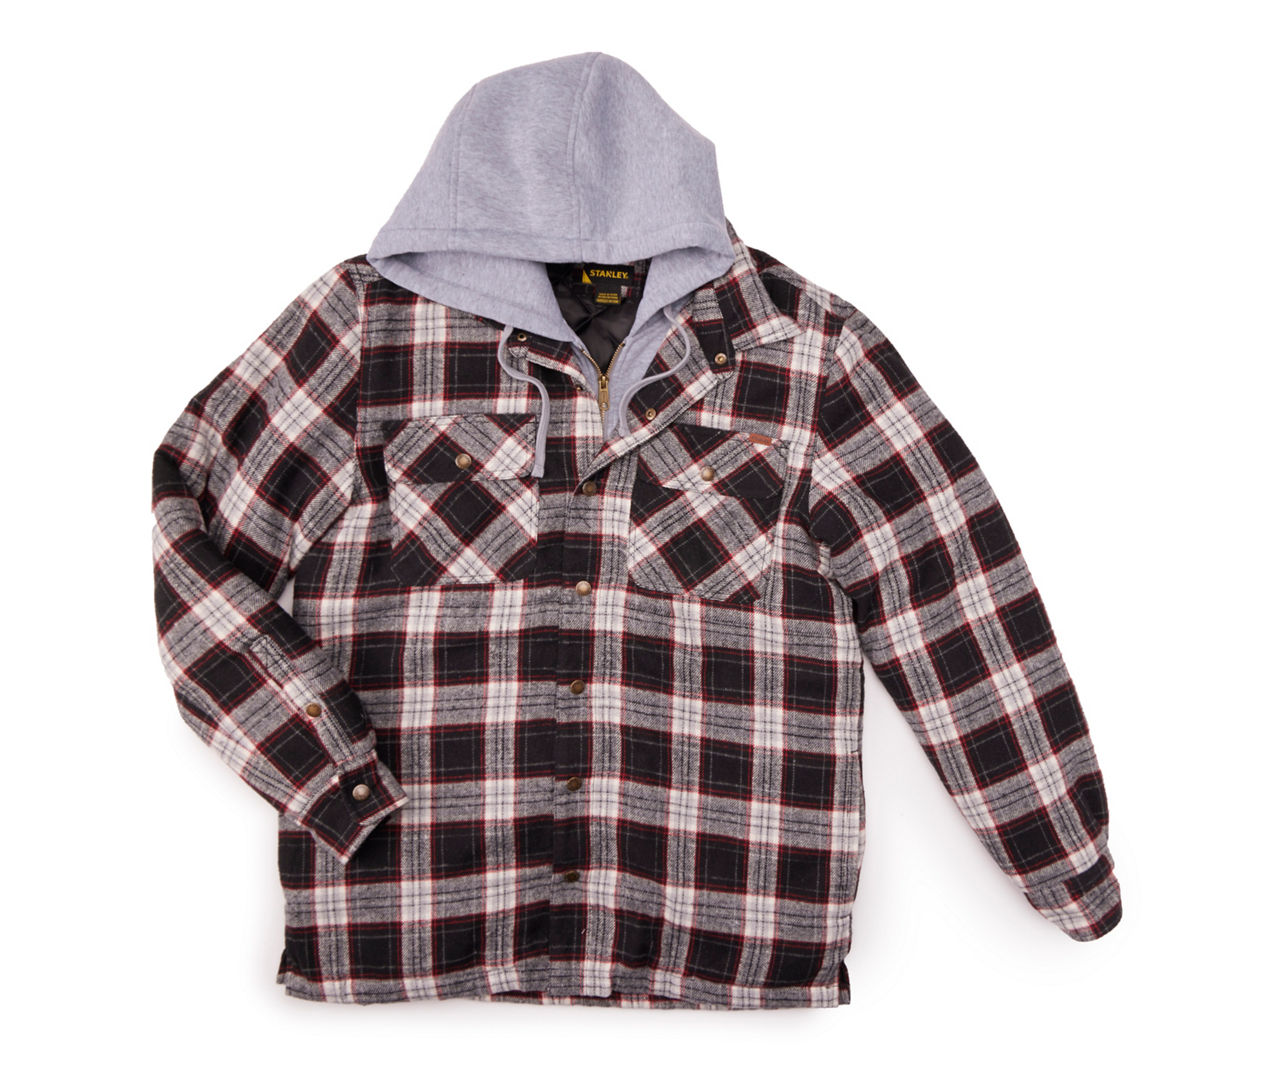 Men's Size L Black, Gray & Red Plaid Hooded Shacket